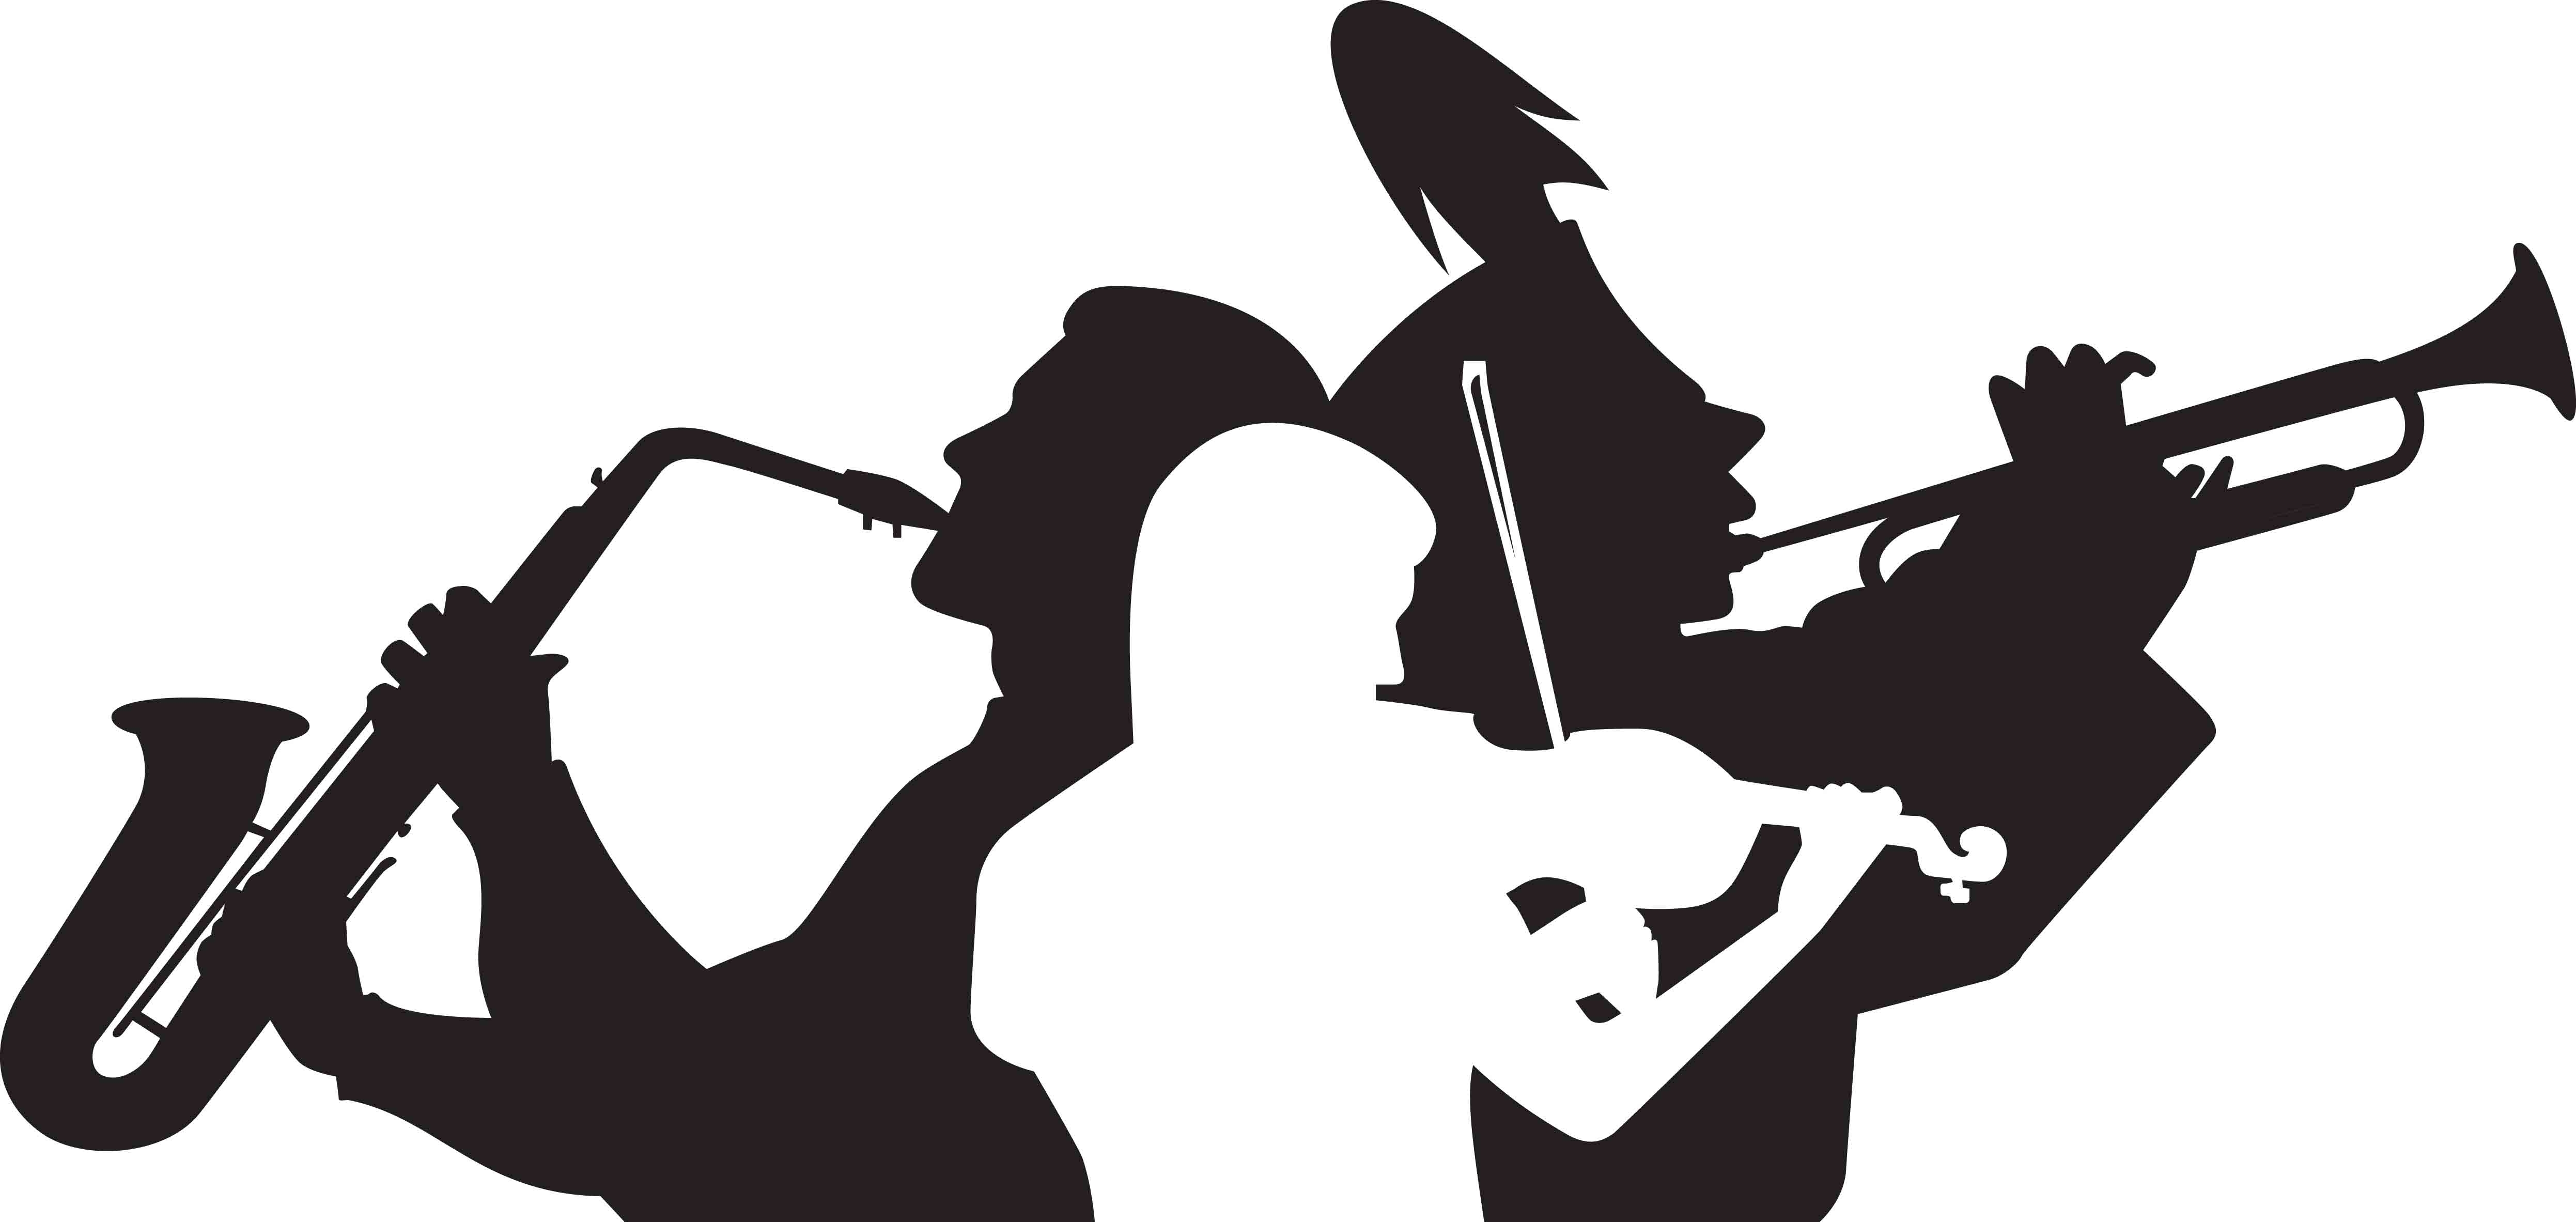 Image of band clipart 2 school band clip art clipartoons